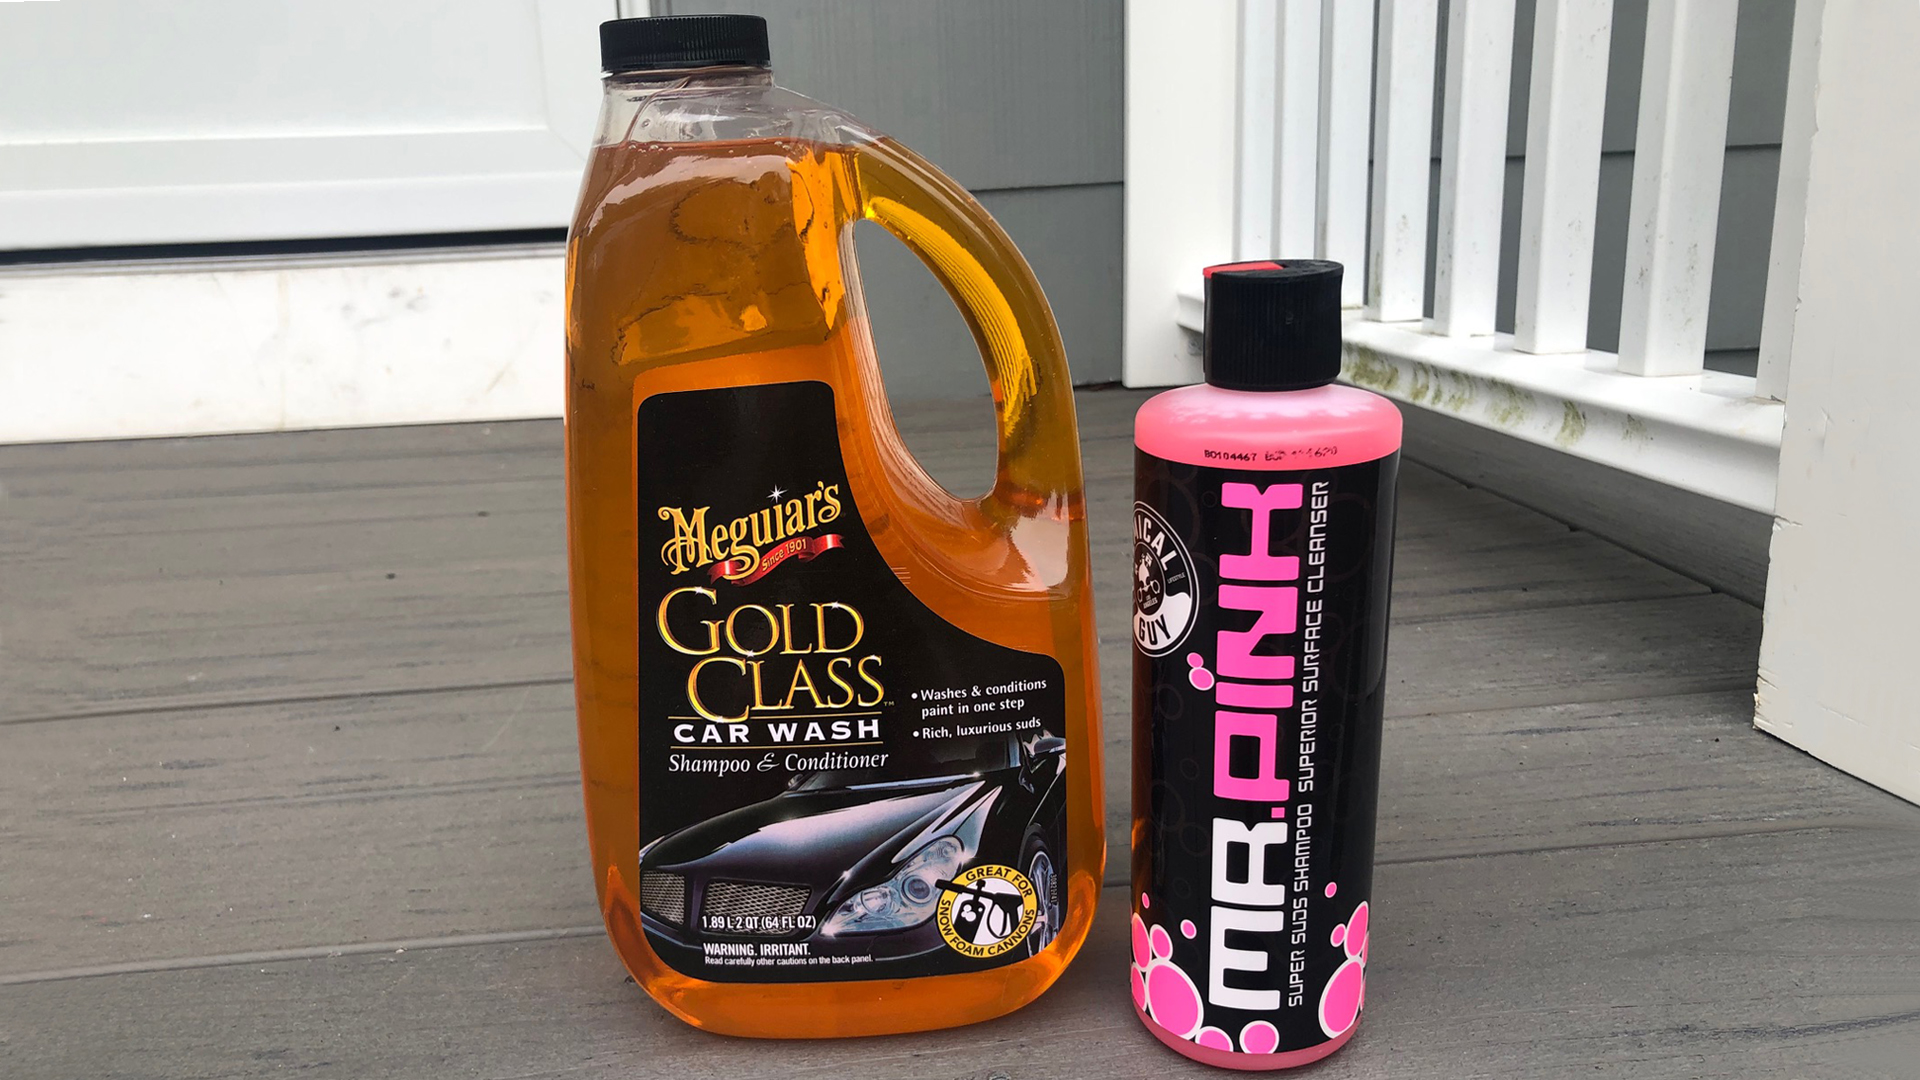 Is Meguiars The Brand To Use? We Put It To The Test To Find Out